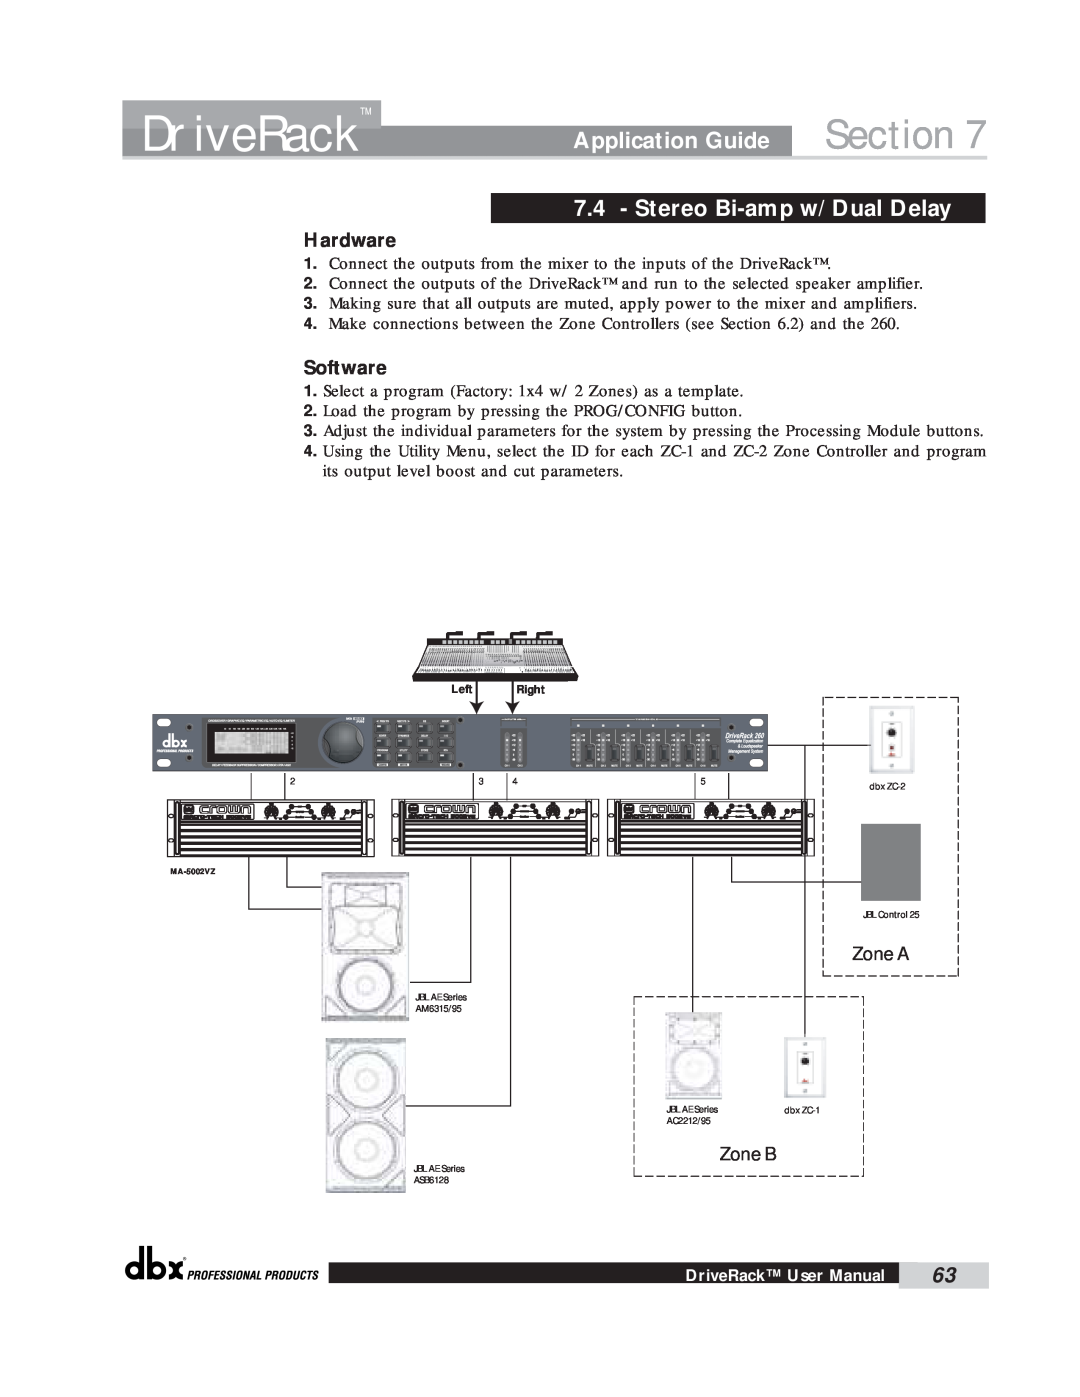 dbx Pro 260 user manual DriveRack, Stereo Bi-ampw/ Dual Delay, Section, Application Guide, Hardware, Software 